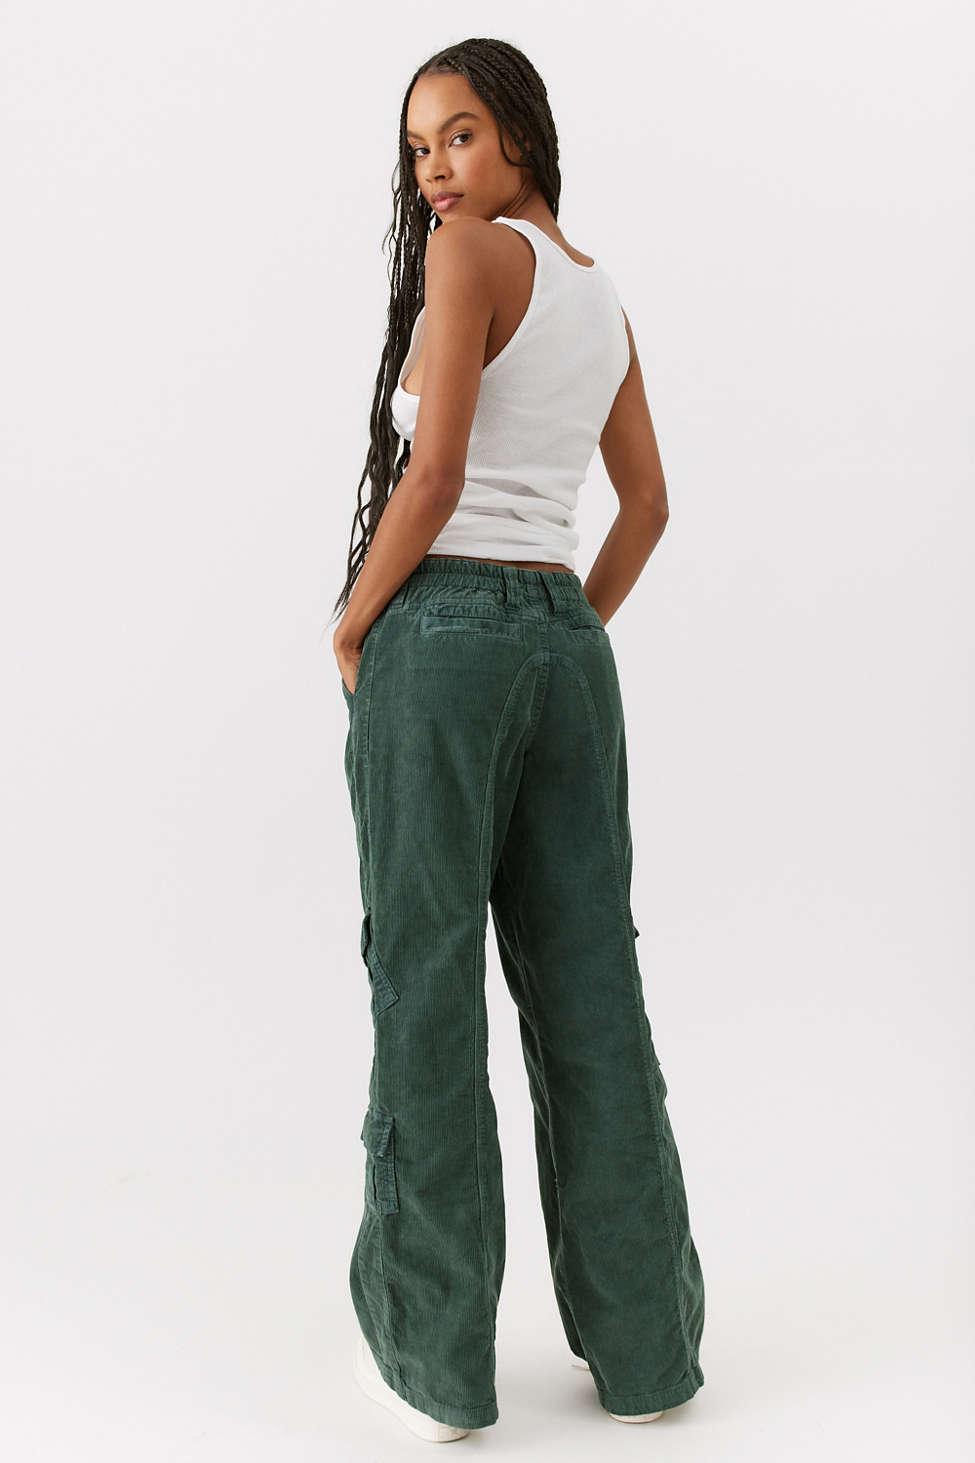 Bdg High And Wide Corduroy Pants, Color is slate, but looks like sage green.